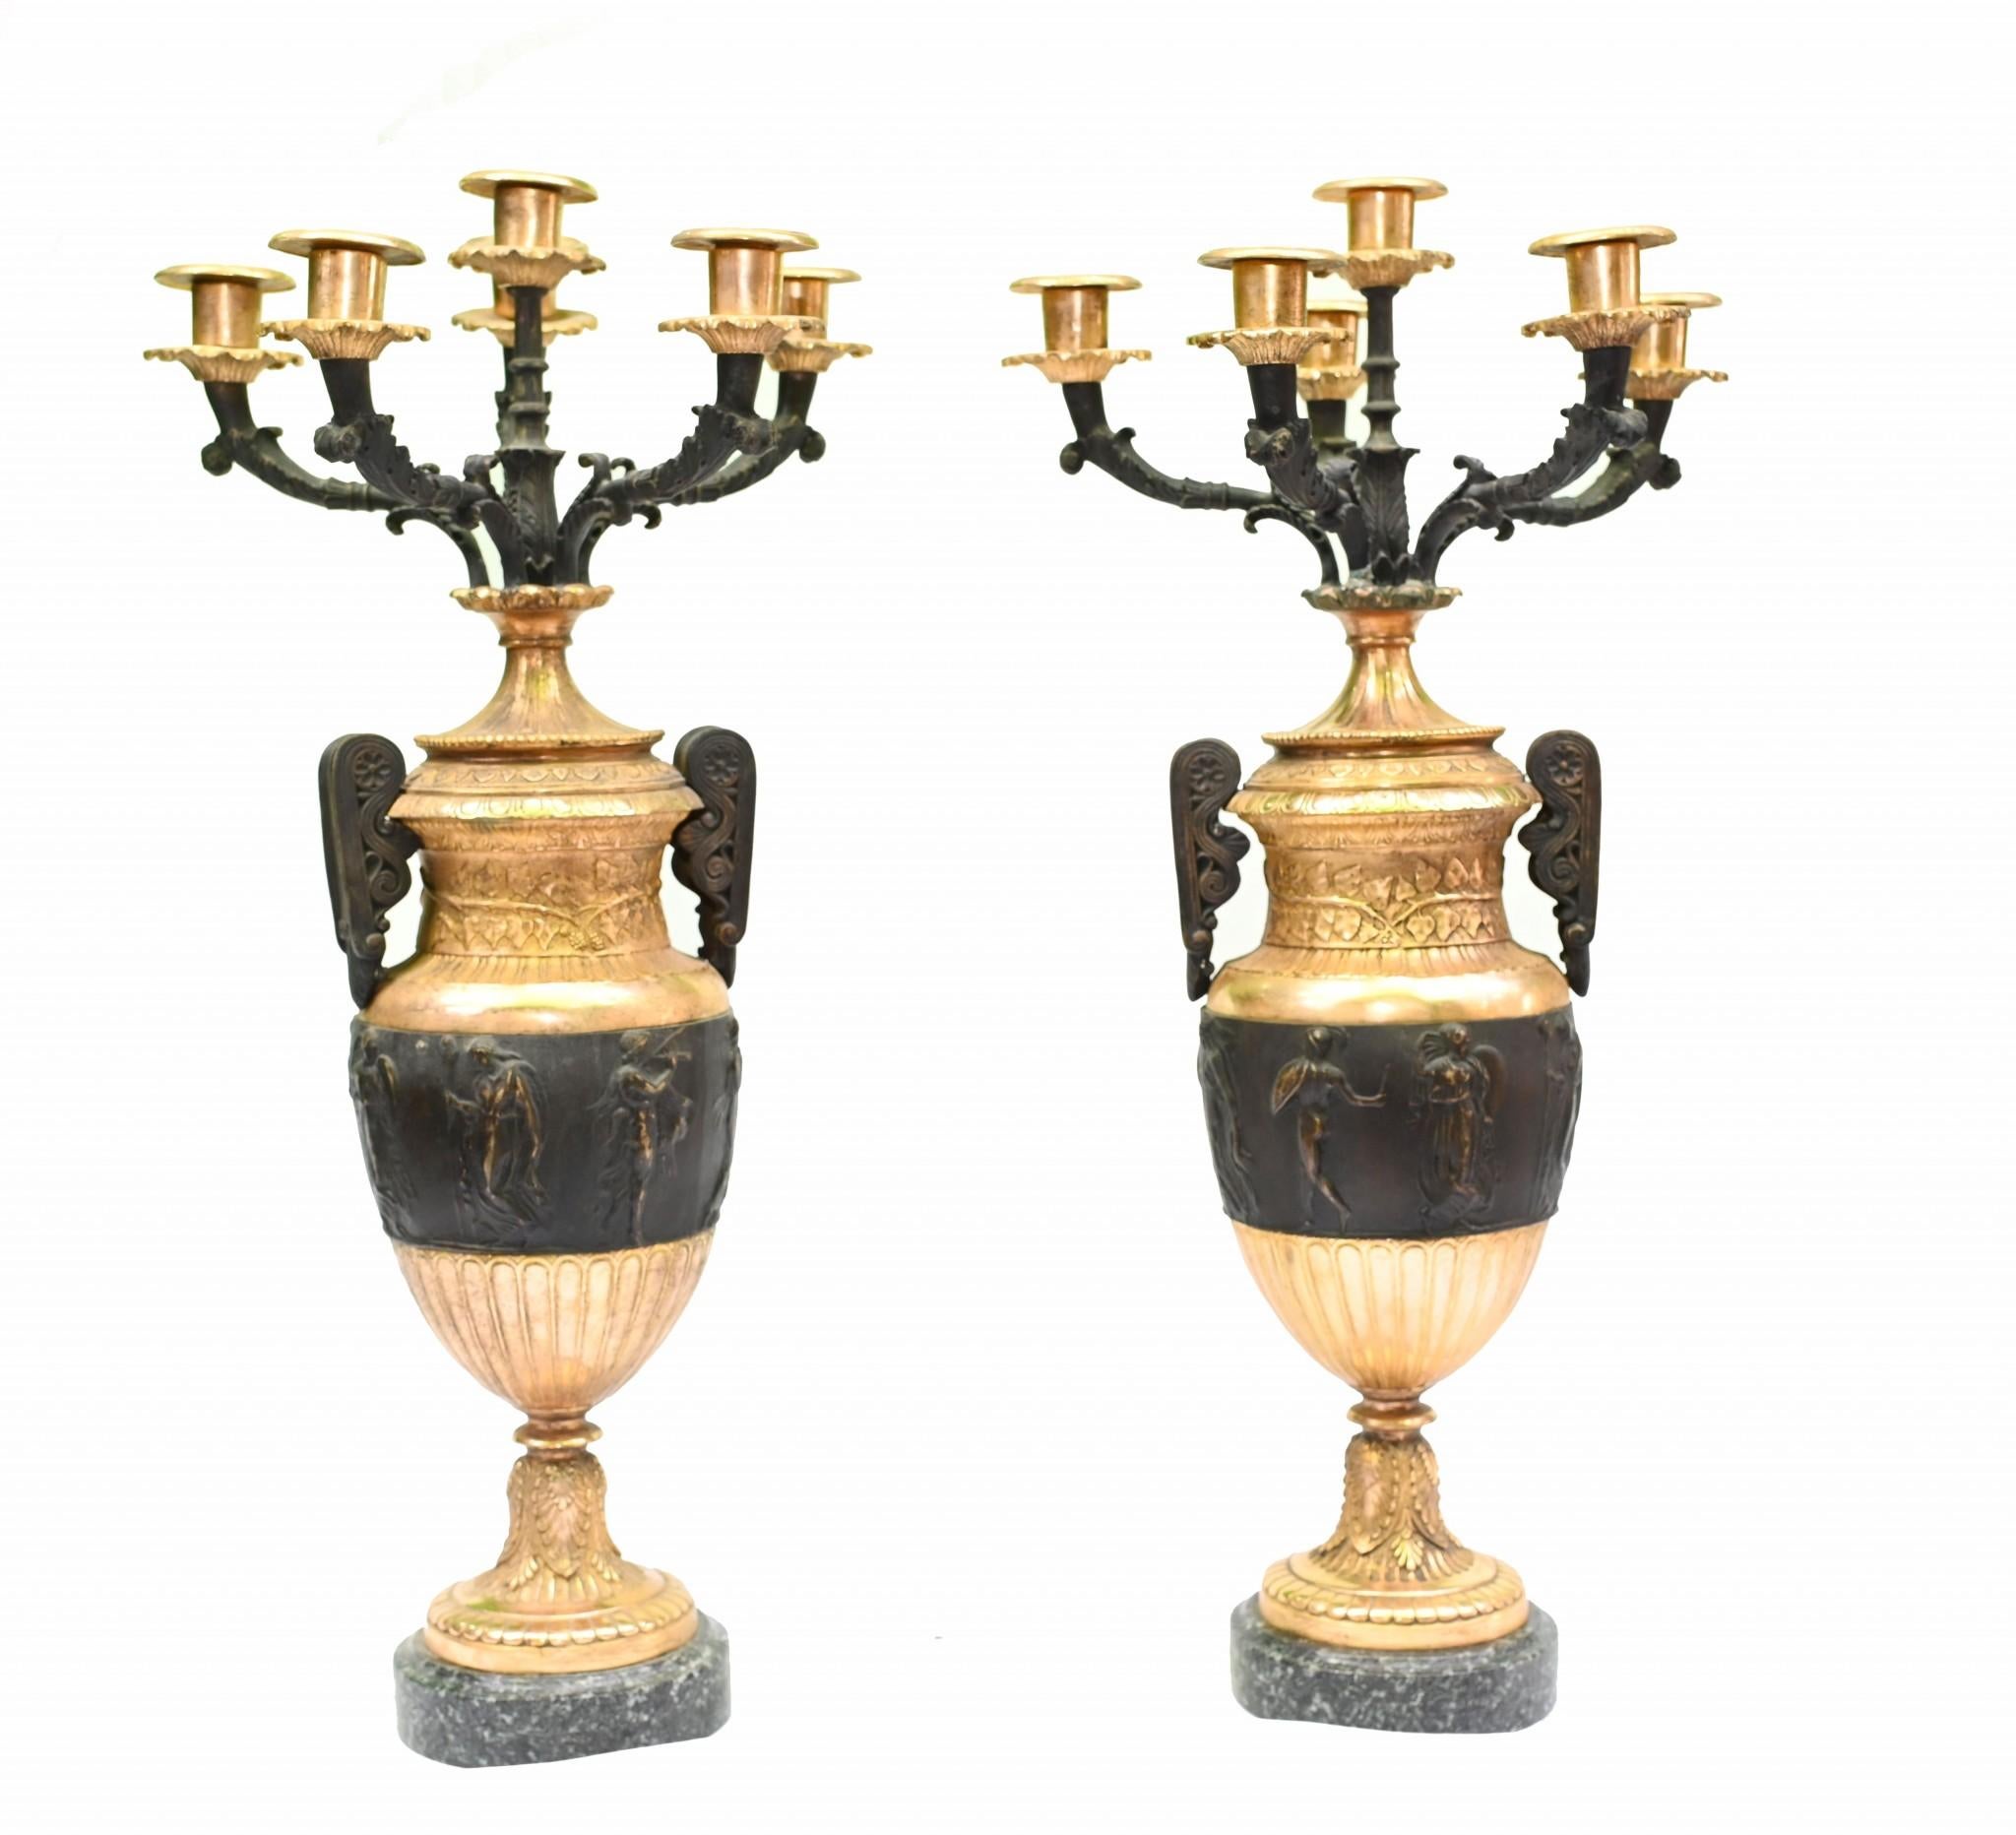 You are viewing a pair of antique gilt and bronze urns in the manner of Thomas Hope
The look is high Regency with a dazzling colour interplay between the black and gilt
They are classic amphora urns - Greek Revival - with various figures in